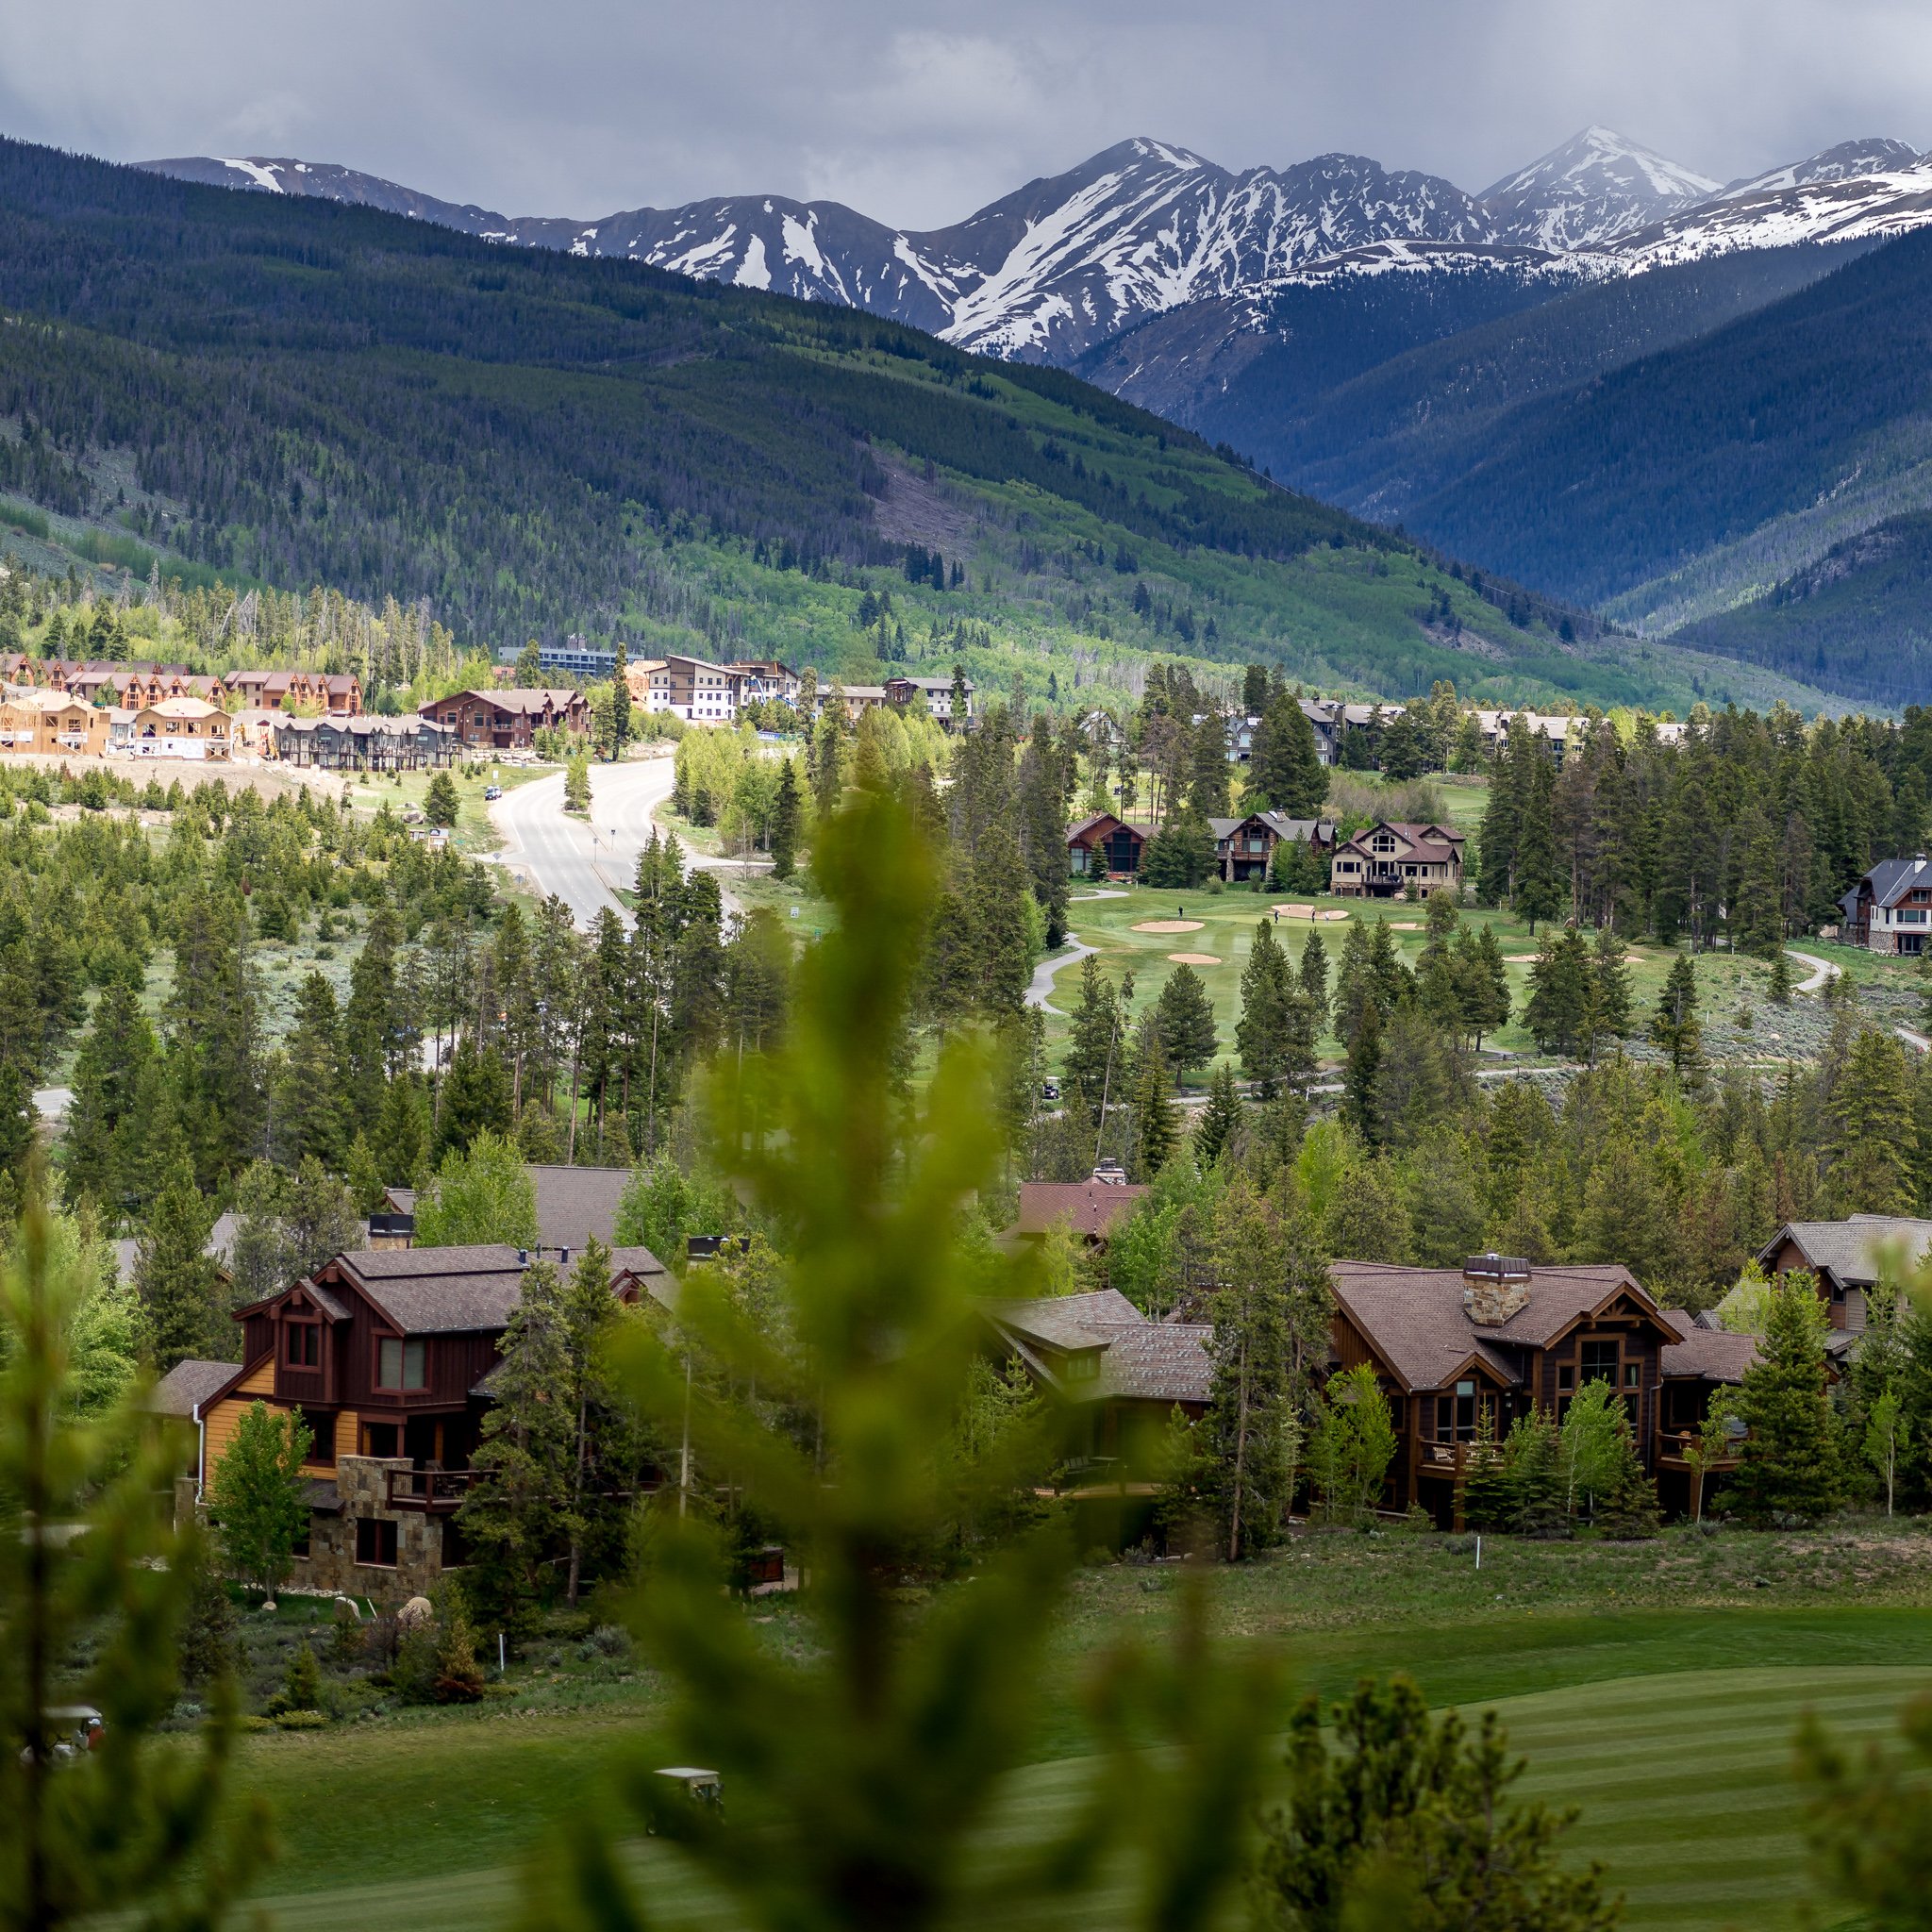 Top things to do in Keystone, Colorado